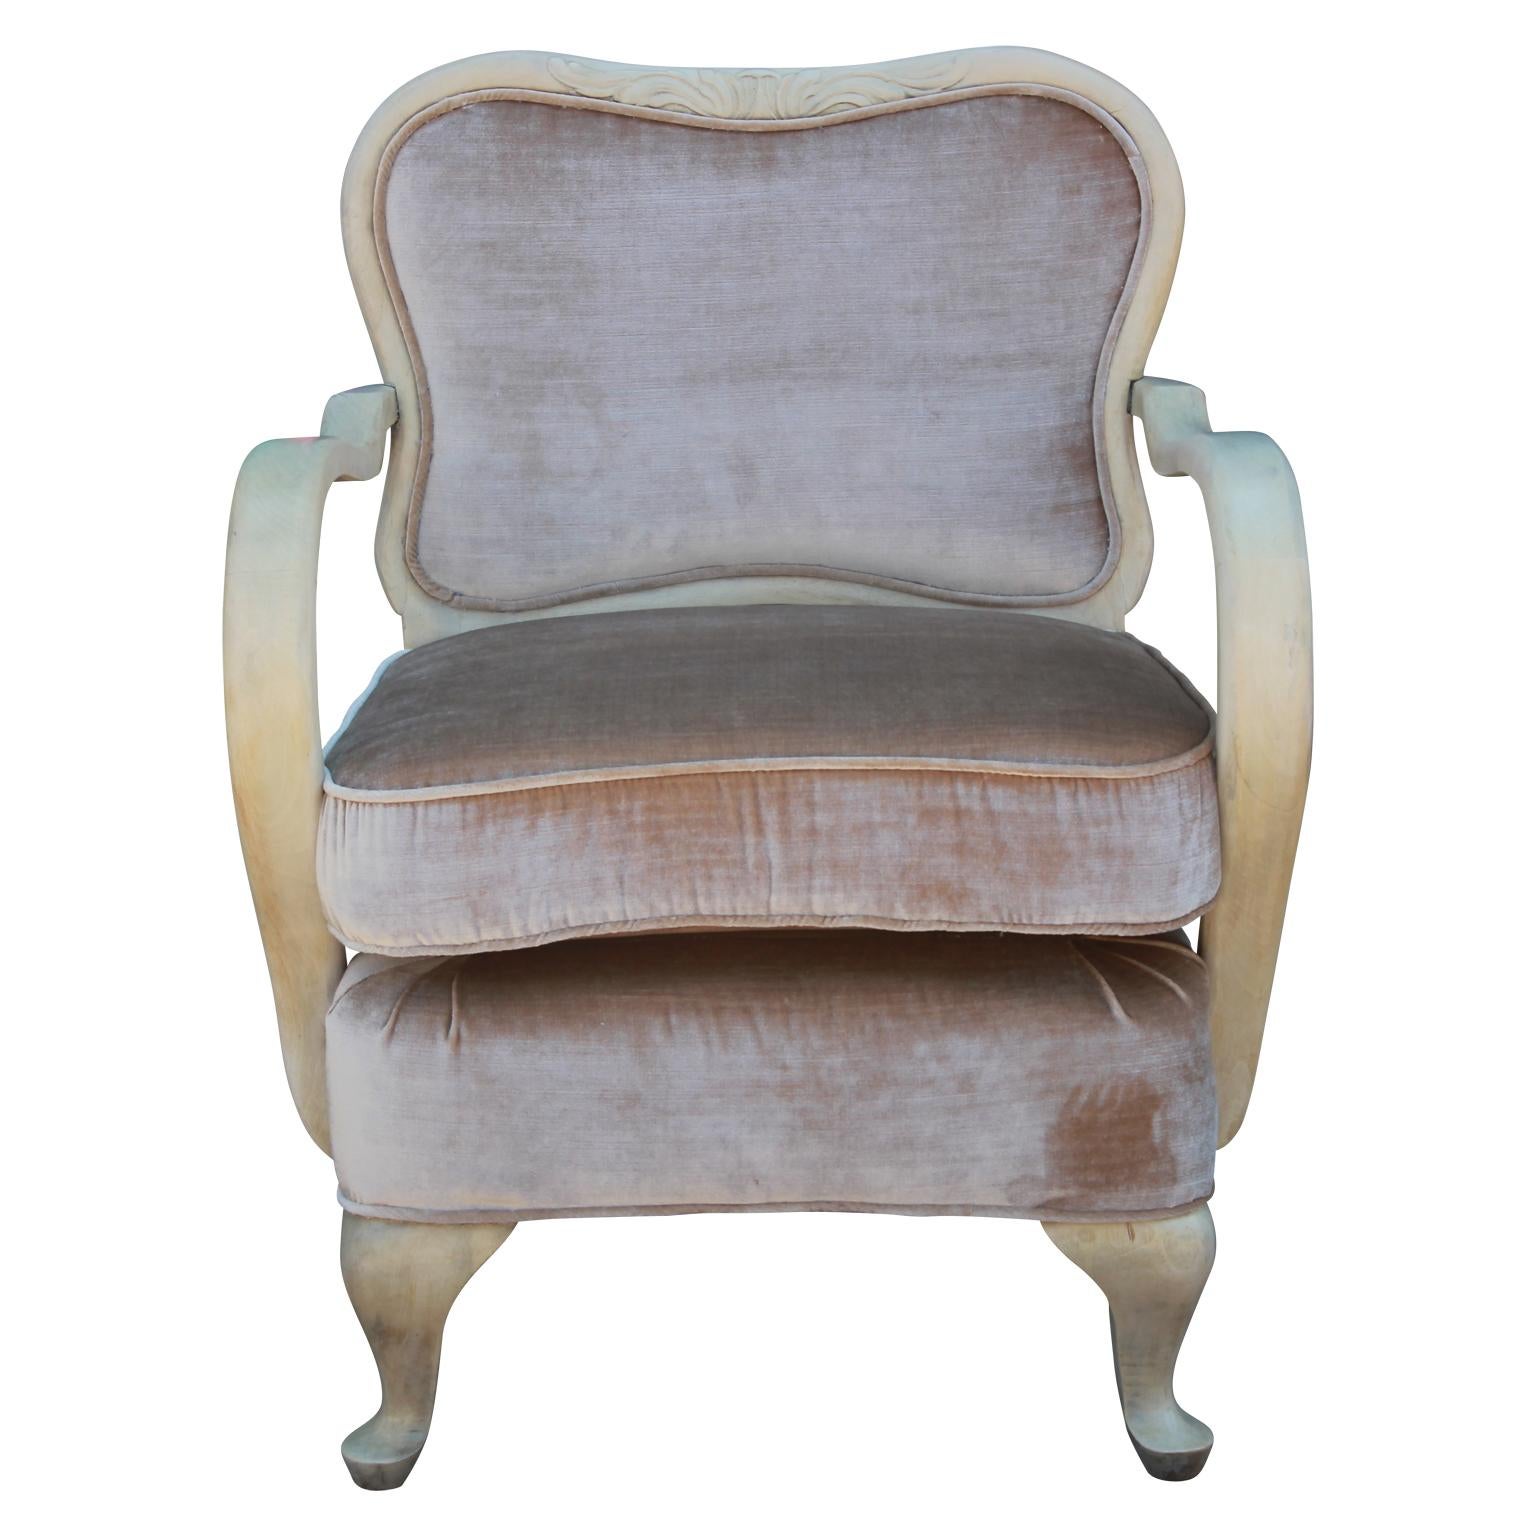 Pair of lovely modern Italian lounge chairs with a neutral finish and freshly upholstered in a lovely light colored velvet. Grosfeld House style with a highly sculptural design.